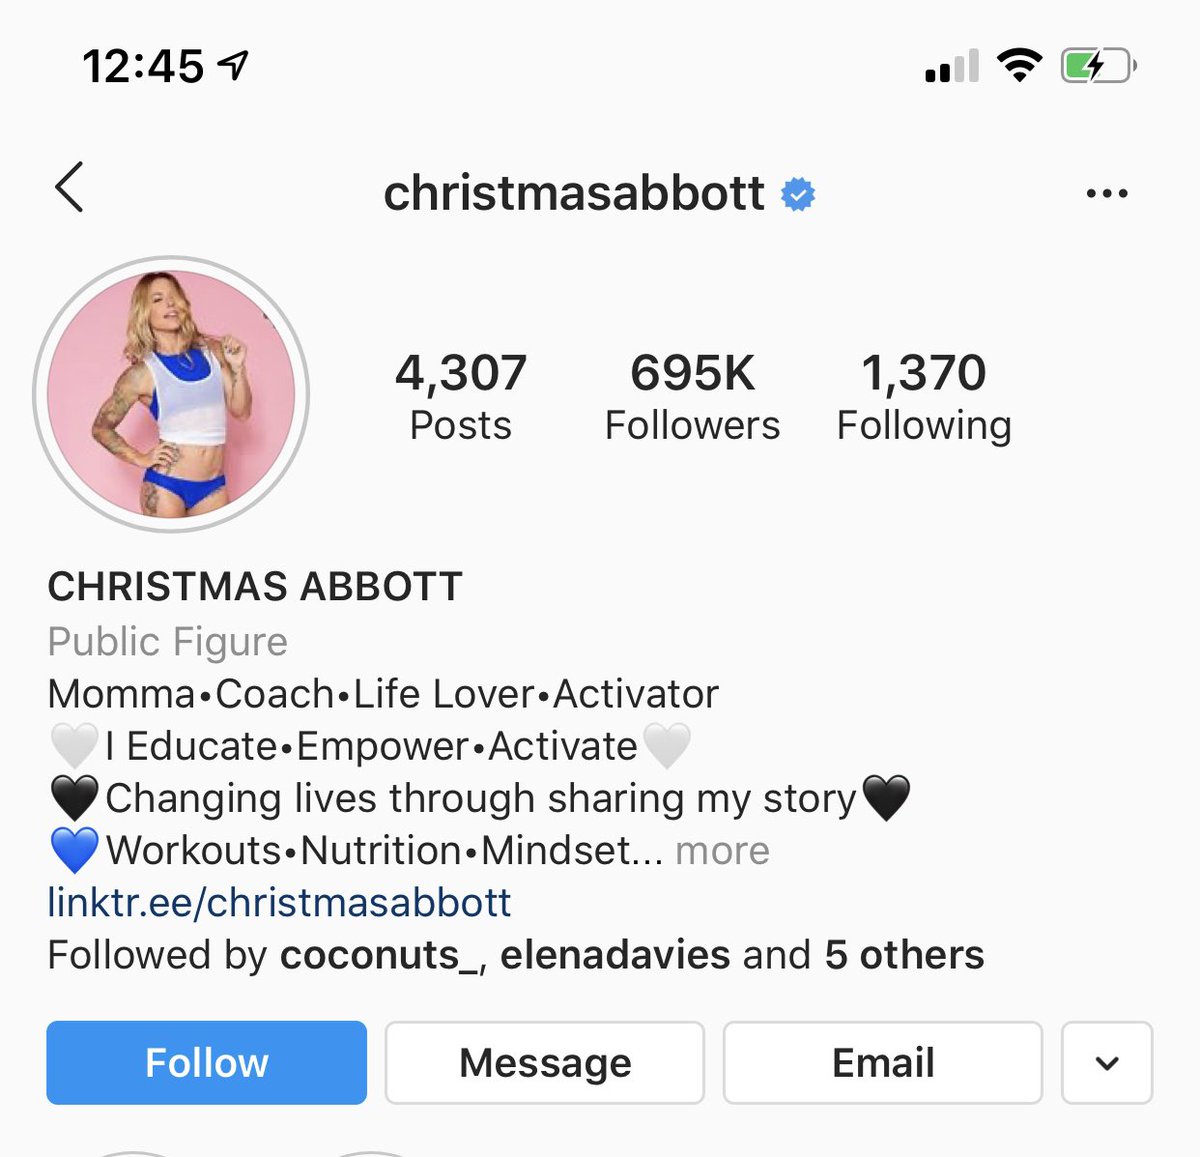 Christmas buys her followers: a thread695K followersshe averages 3,704 likes per post0.53% of her followers engage by liking her postsI will be comparing these stats to her fellow houseguests from  #bb19 and  #bb22 in the following tweets. 1/6